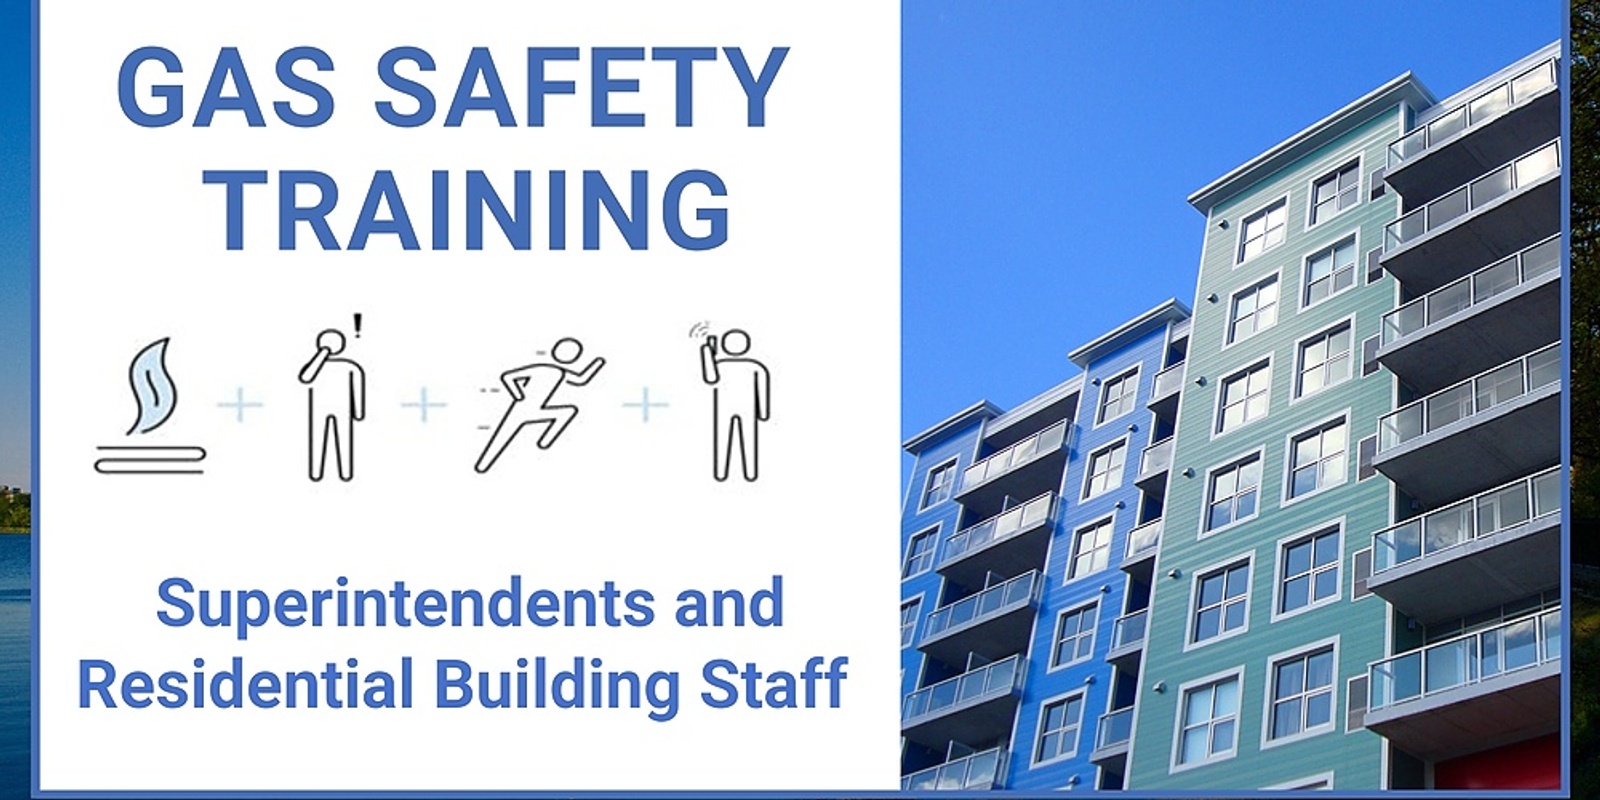 Gas Safety Training for Superintendents and Residential Building Staff